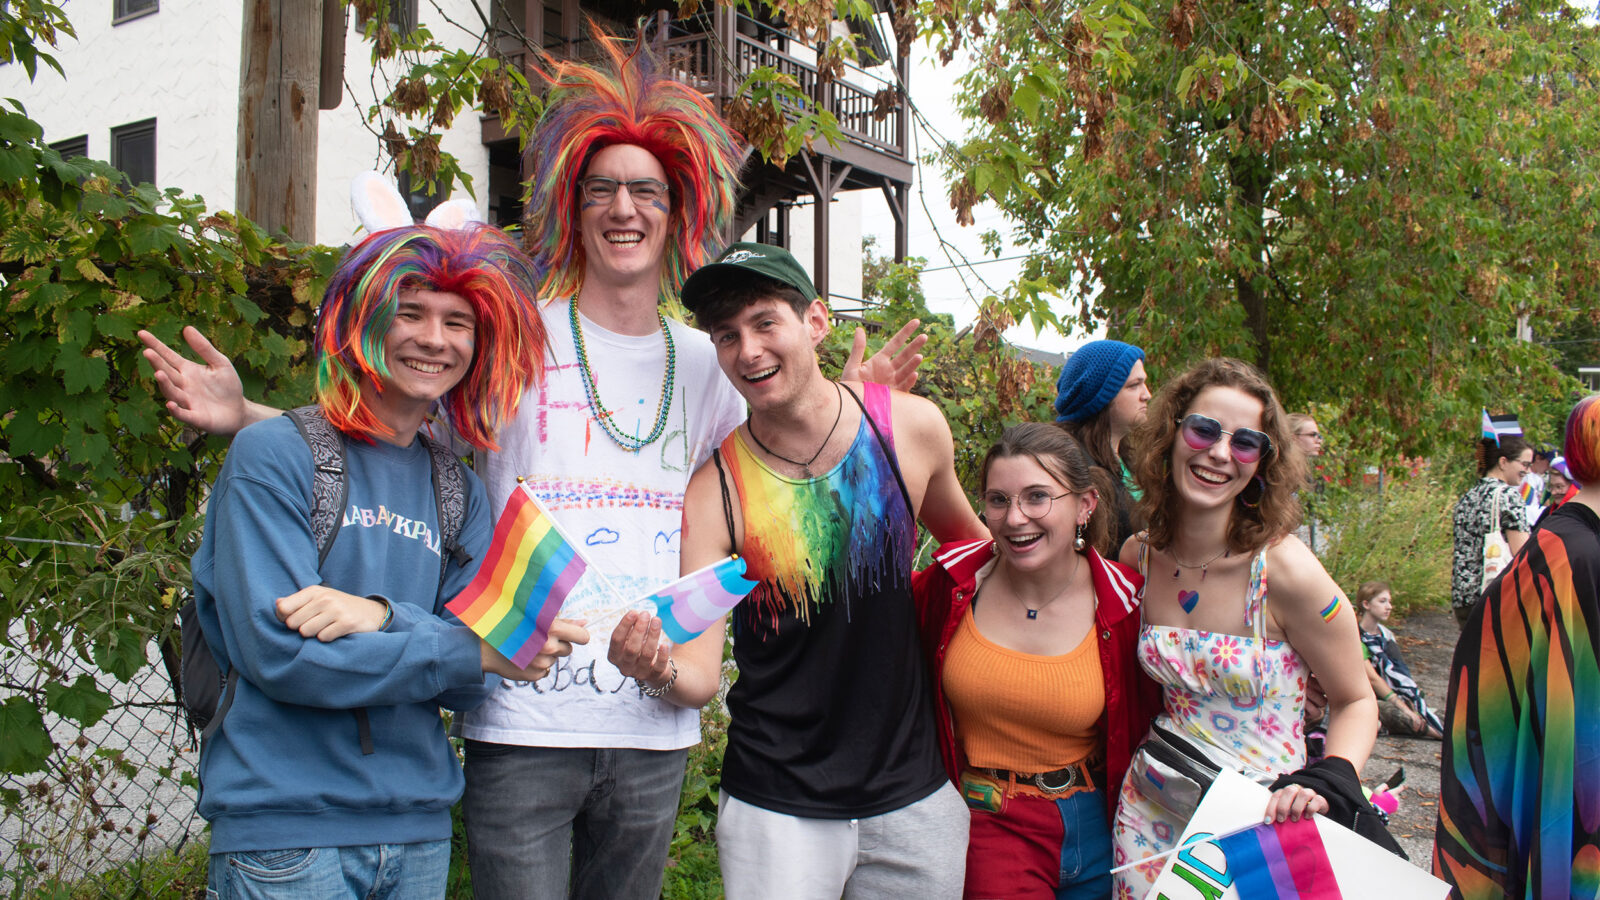 five students wearing rainbow wigs and bright colorful clothing smile during the burlington pride parade